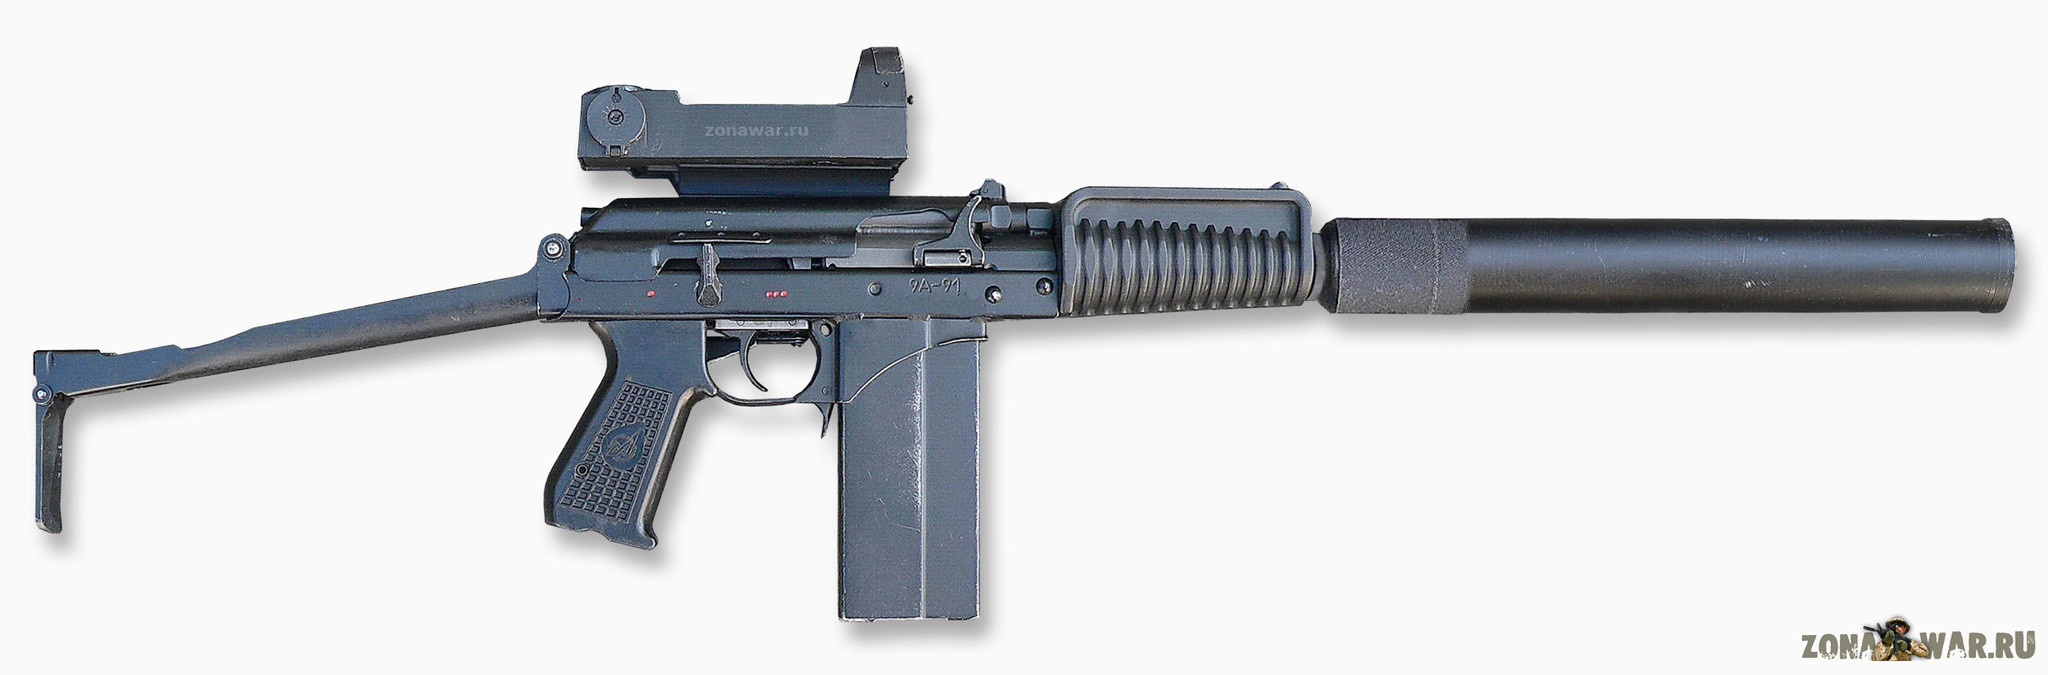 9A-91 assault rifle with a collimating sight and an unfolded stock